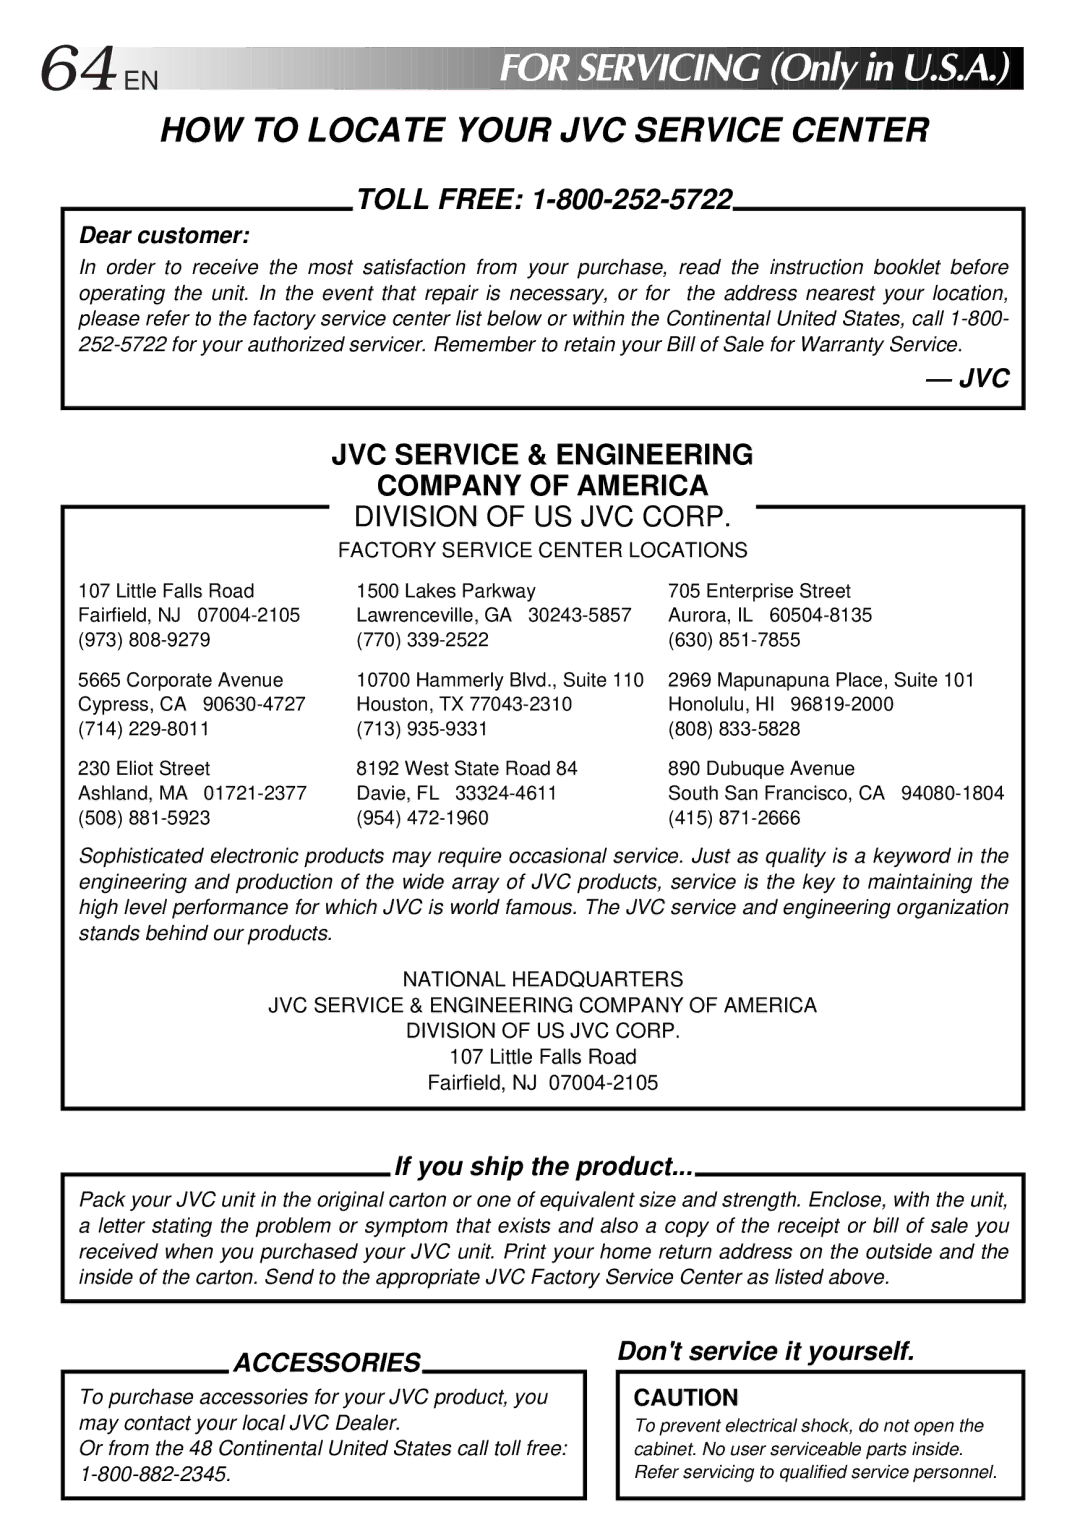 JVC GR-AXM300 manual EN for Servicing Only in U.S.A, HOW to Locate Your JVC Service Center 